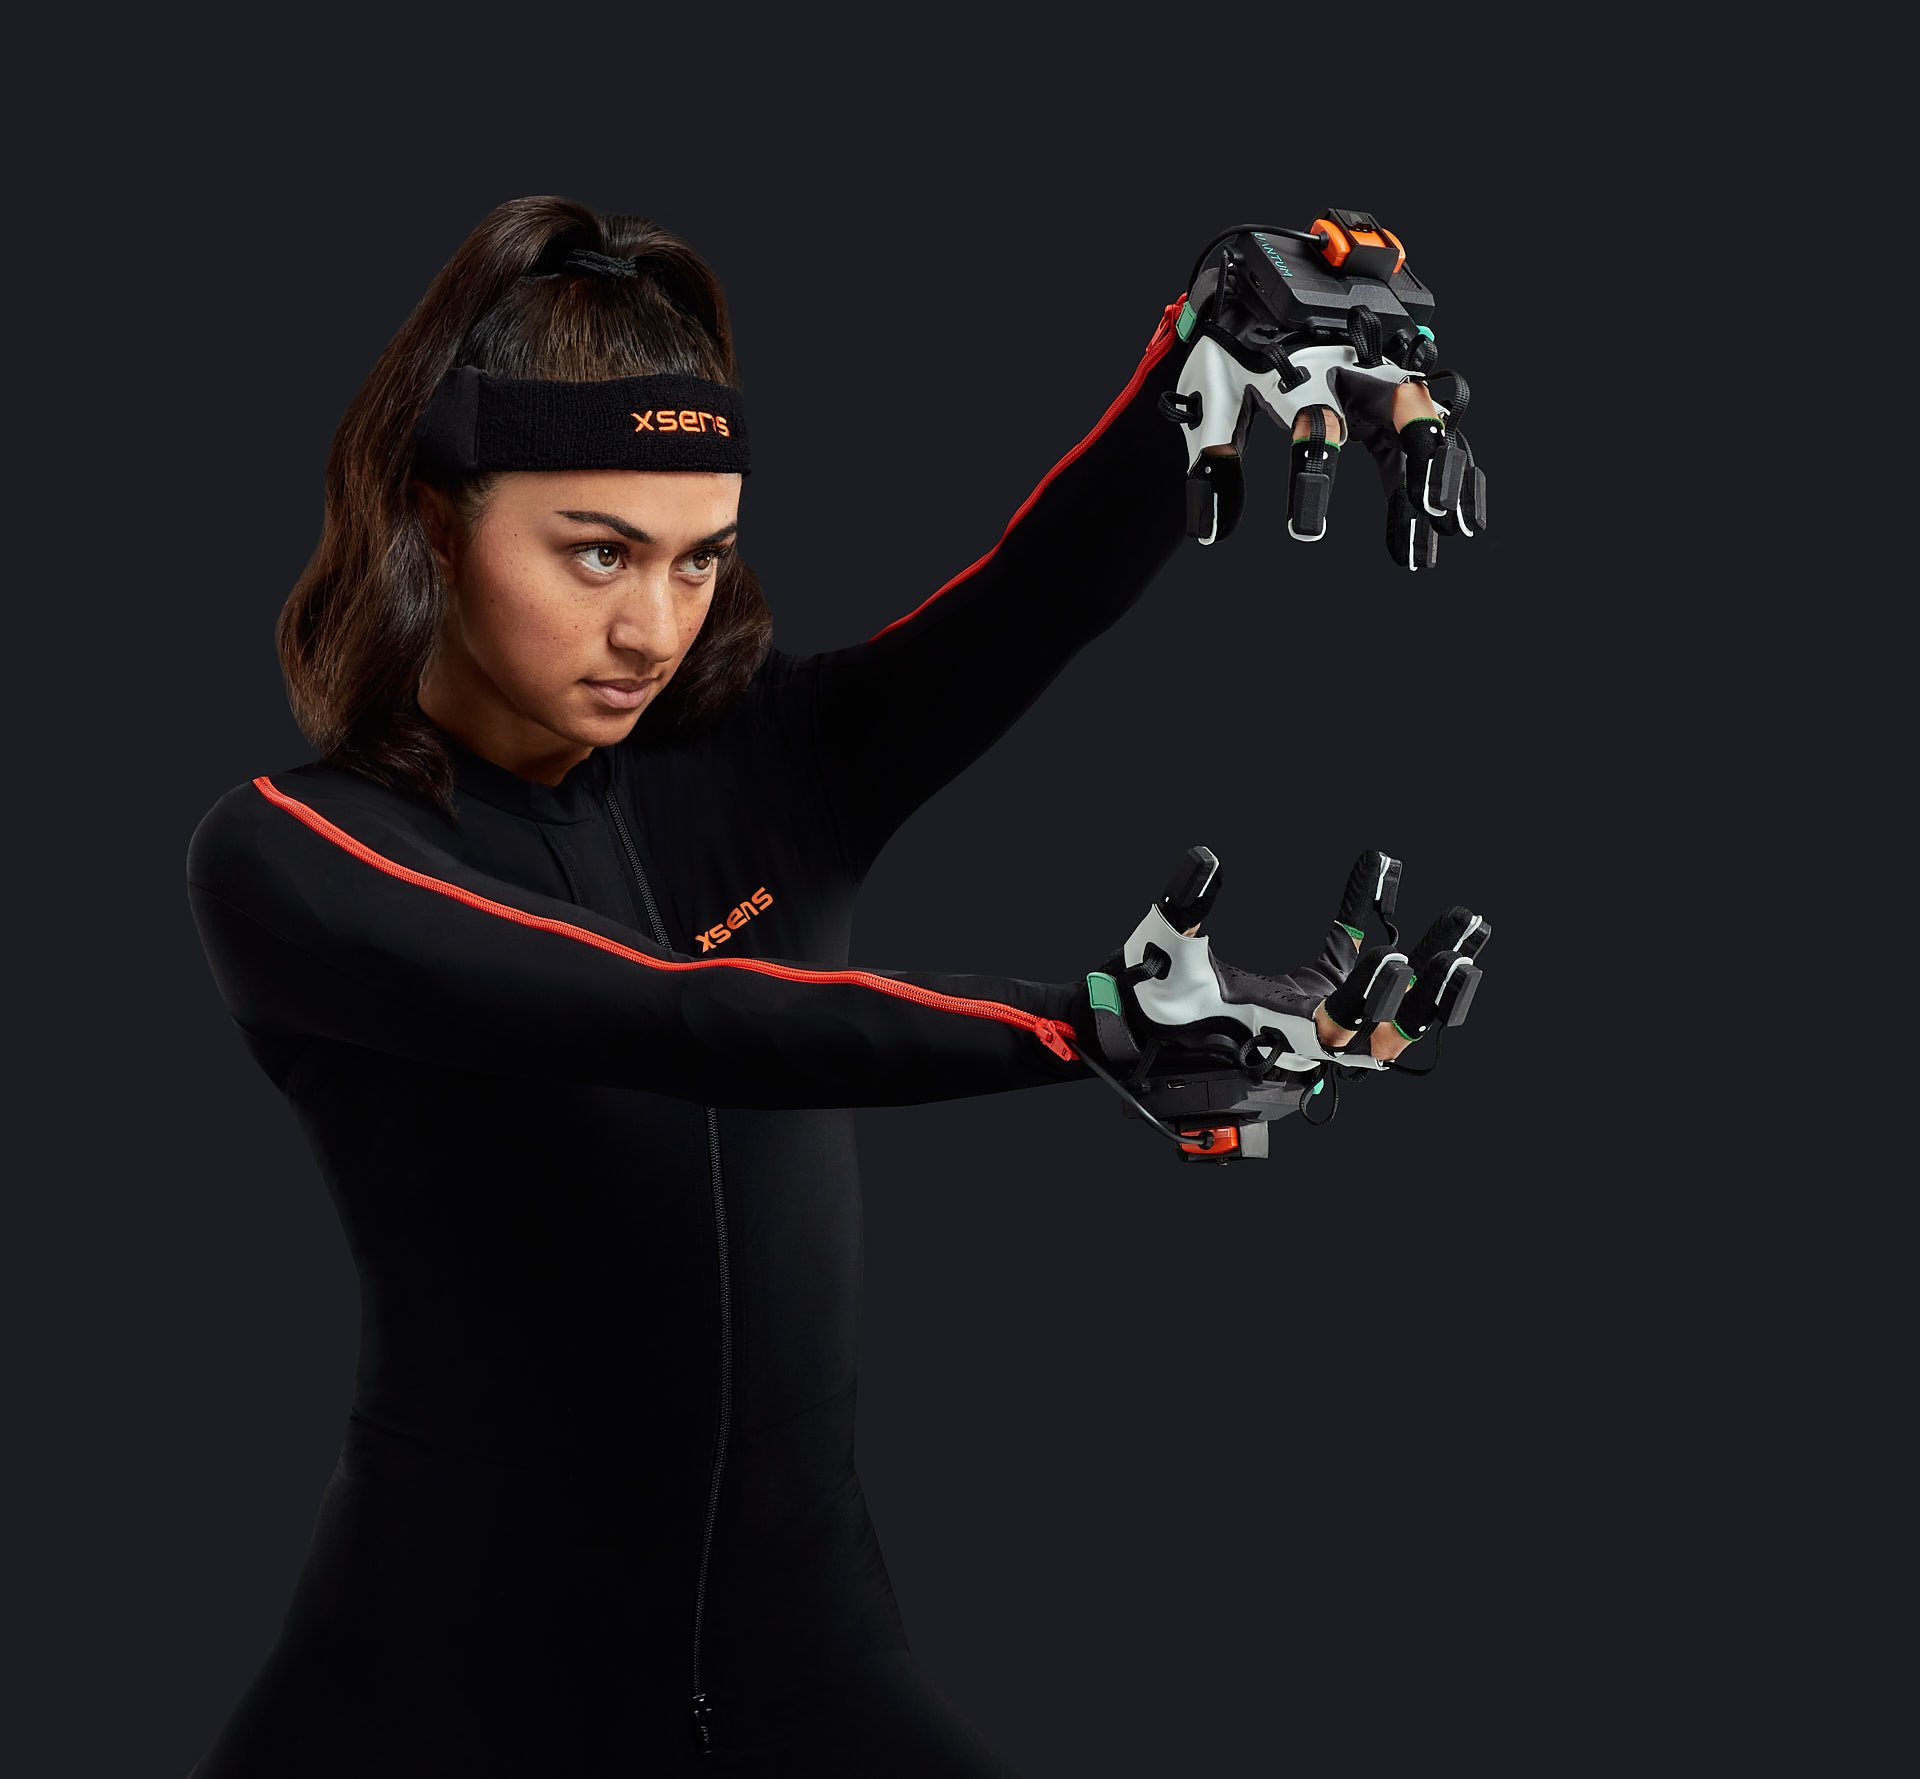 Woman wearing motion capture suit with xsens gloves on